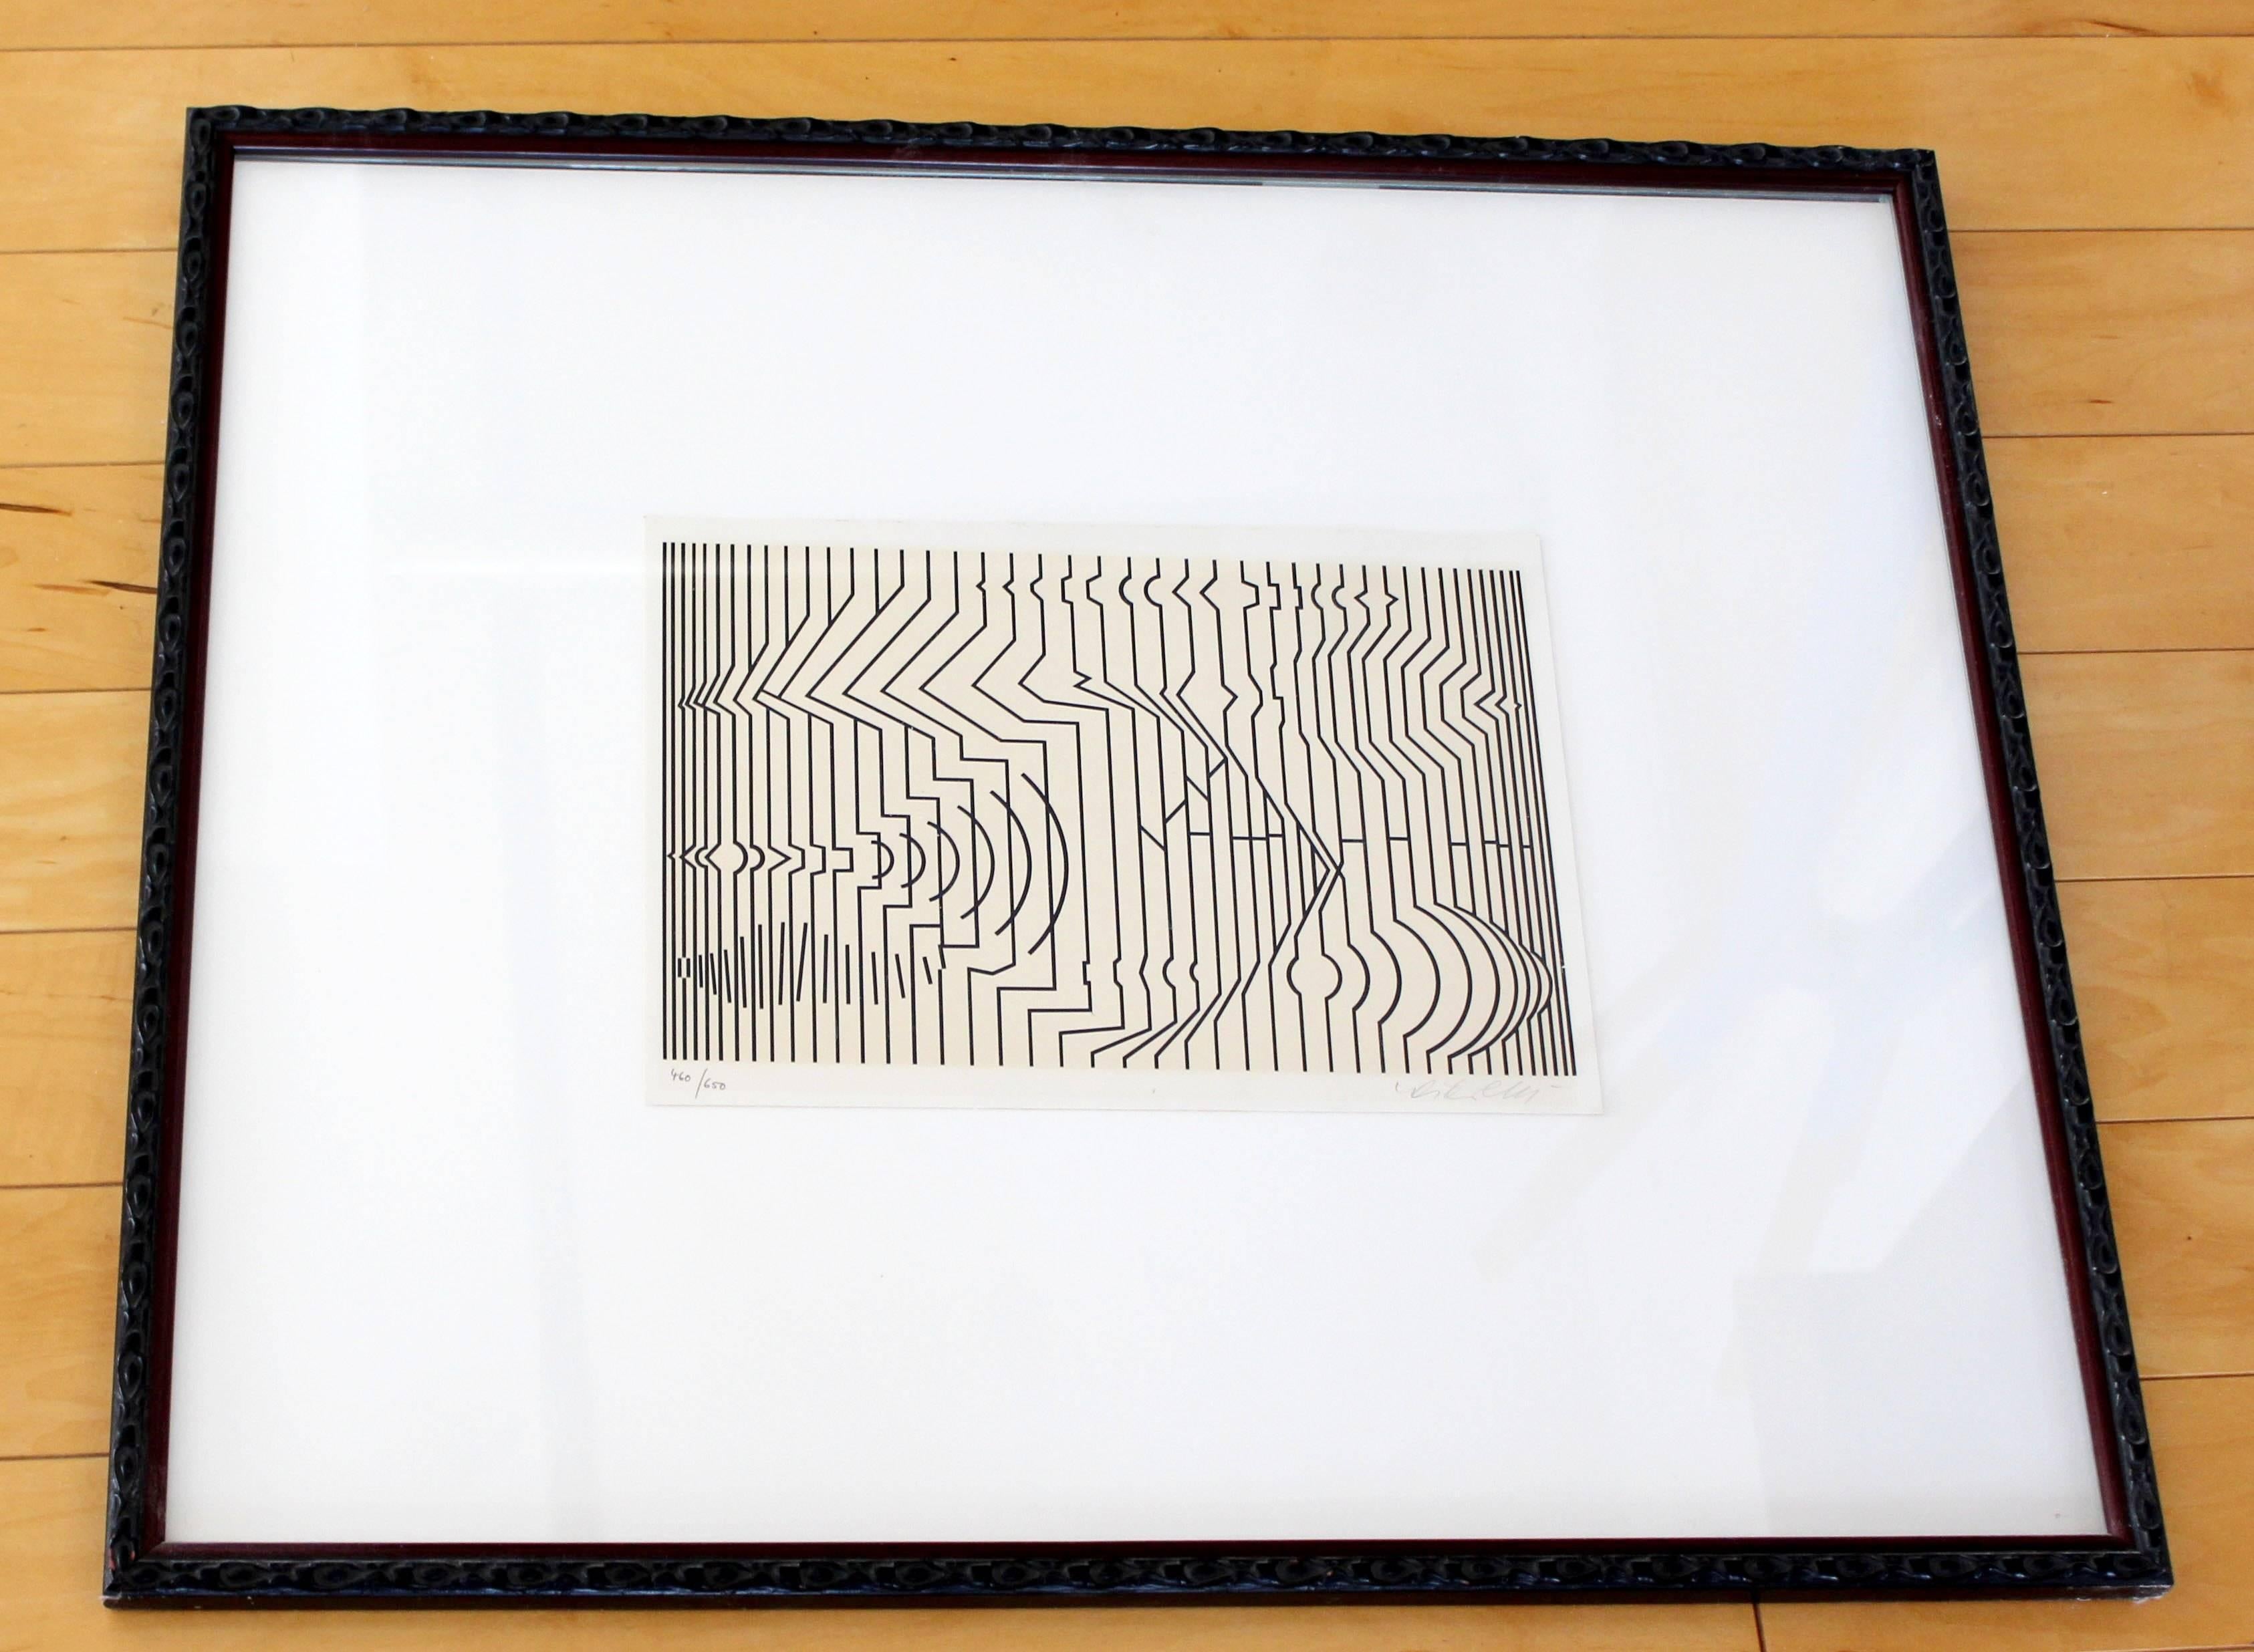 For your consideration is a framed print of a pop art piece by Victor Vasarely, titled Nuisances I created in 1971 signed and numbered 460/650. In excellent condition. The dimensions of the frame are 23